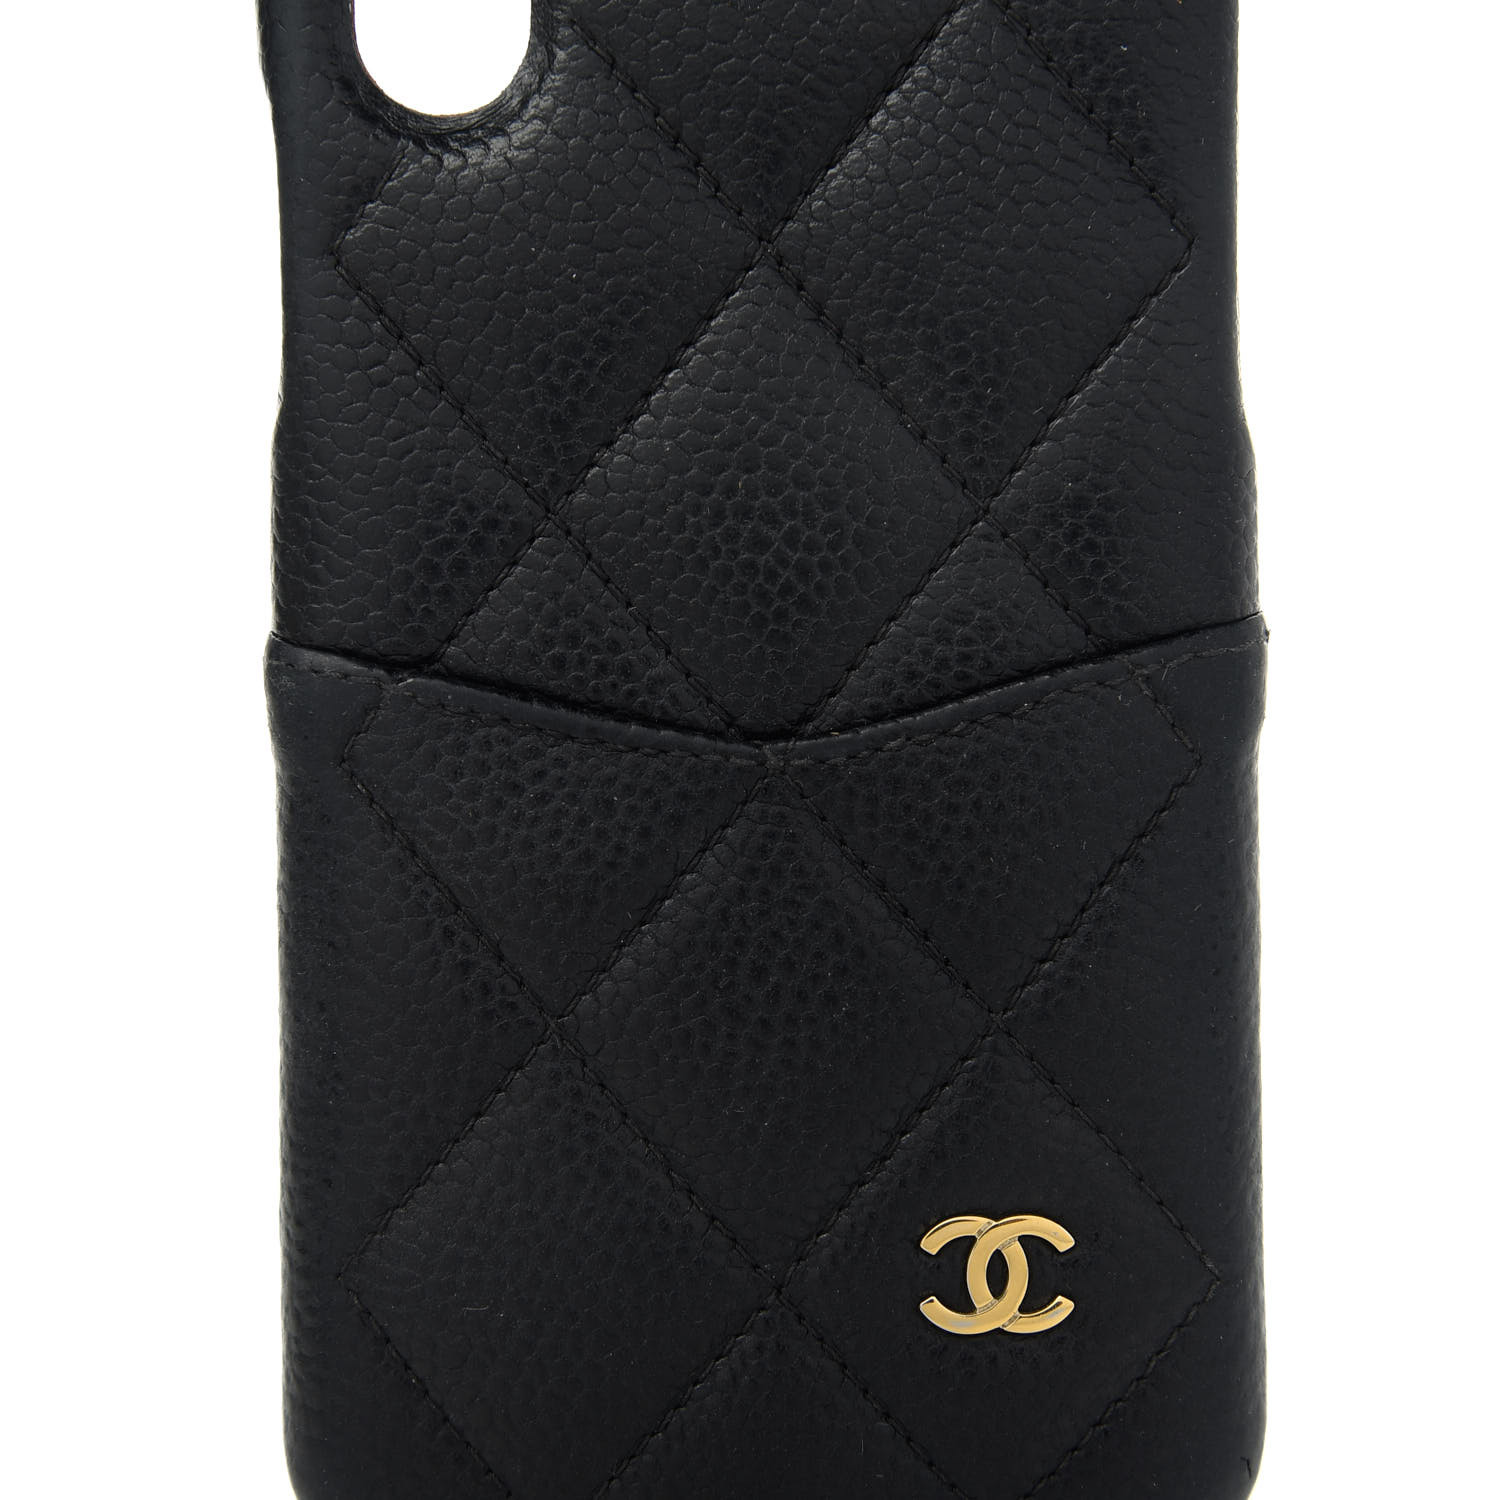 Chanel Caviar Quilted Iphone X Coco Tech Case Black Fashionphile